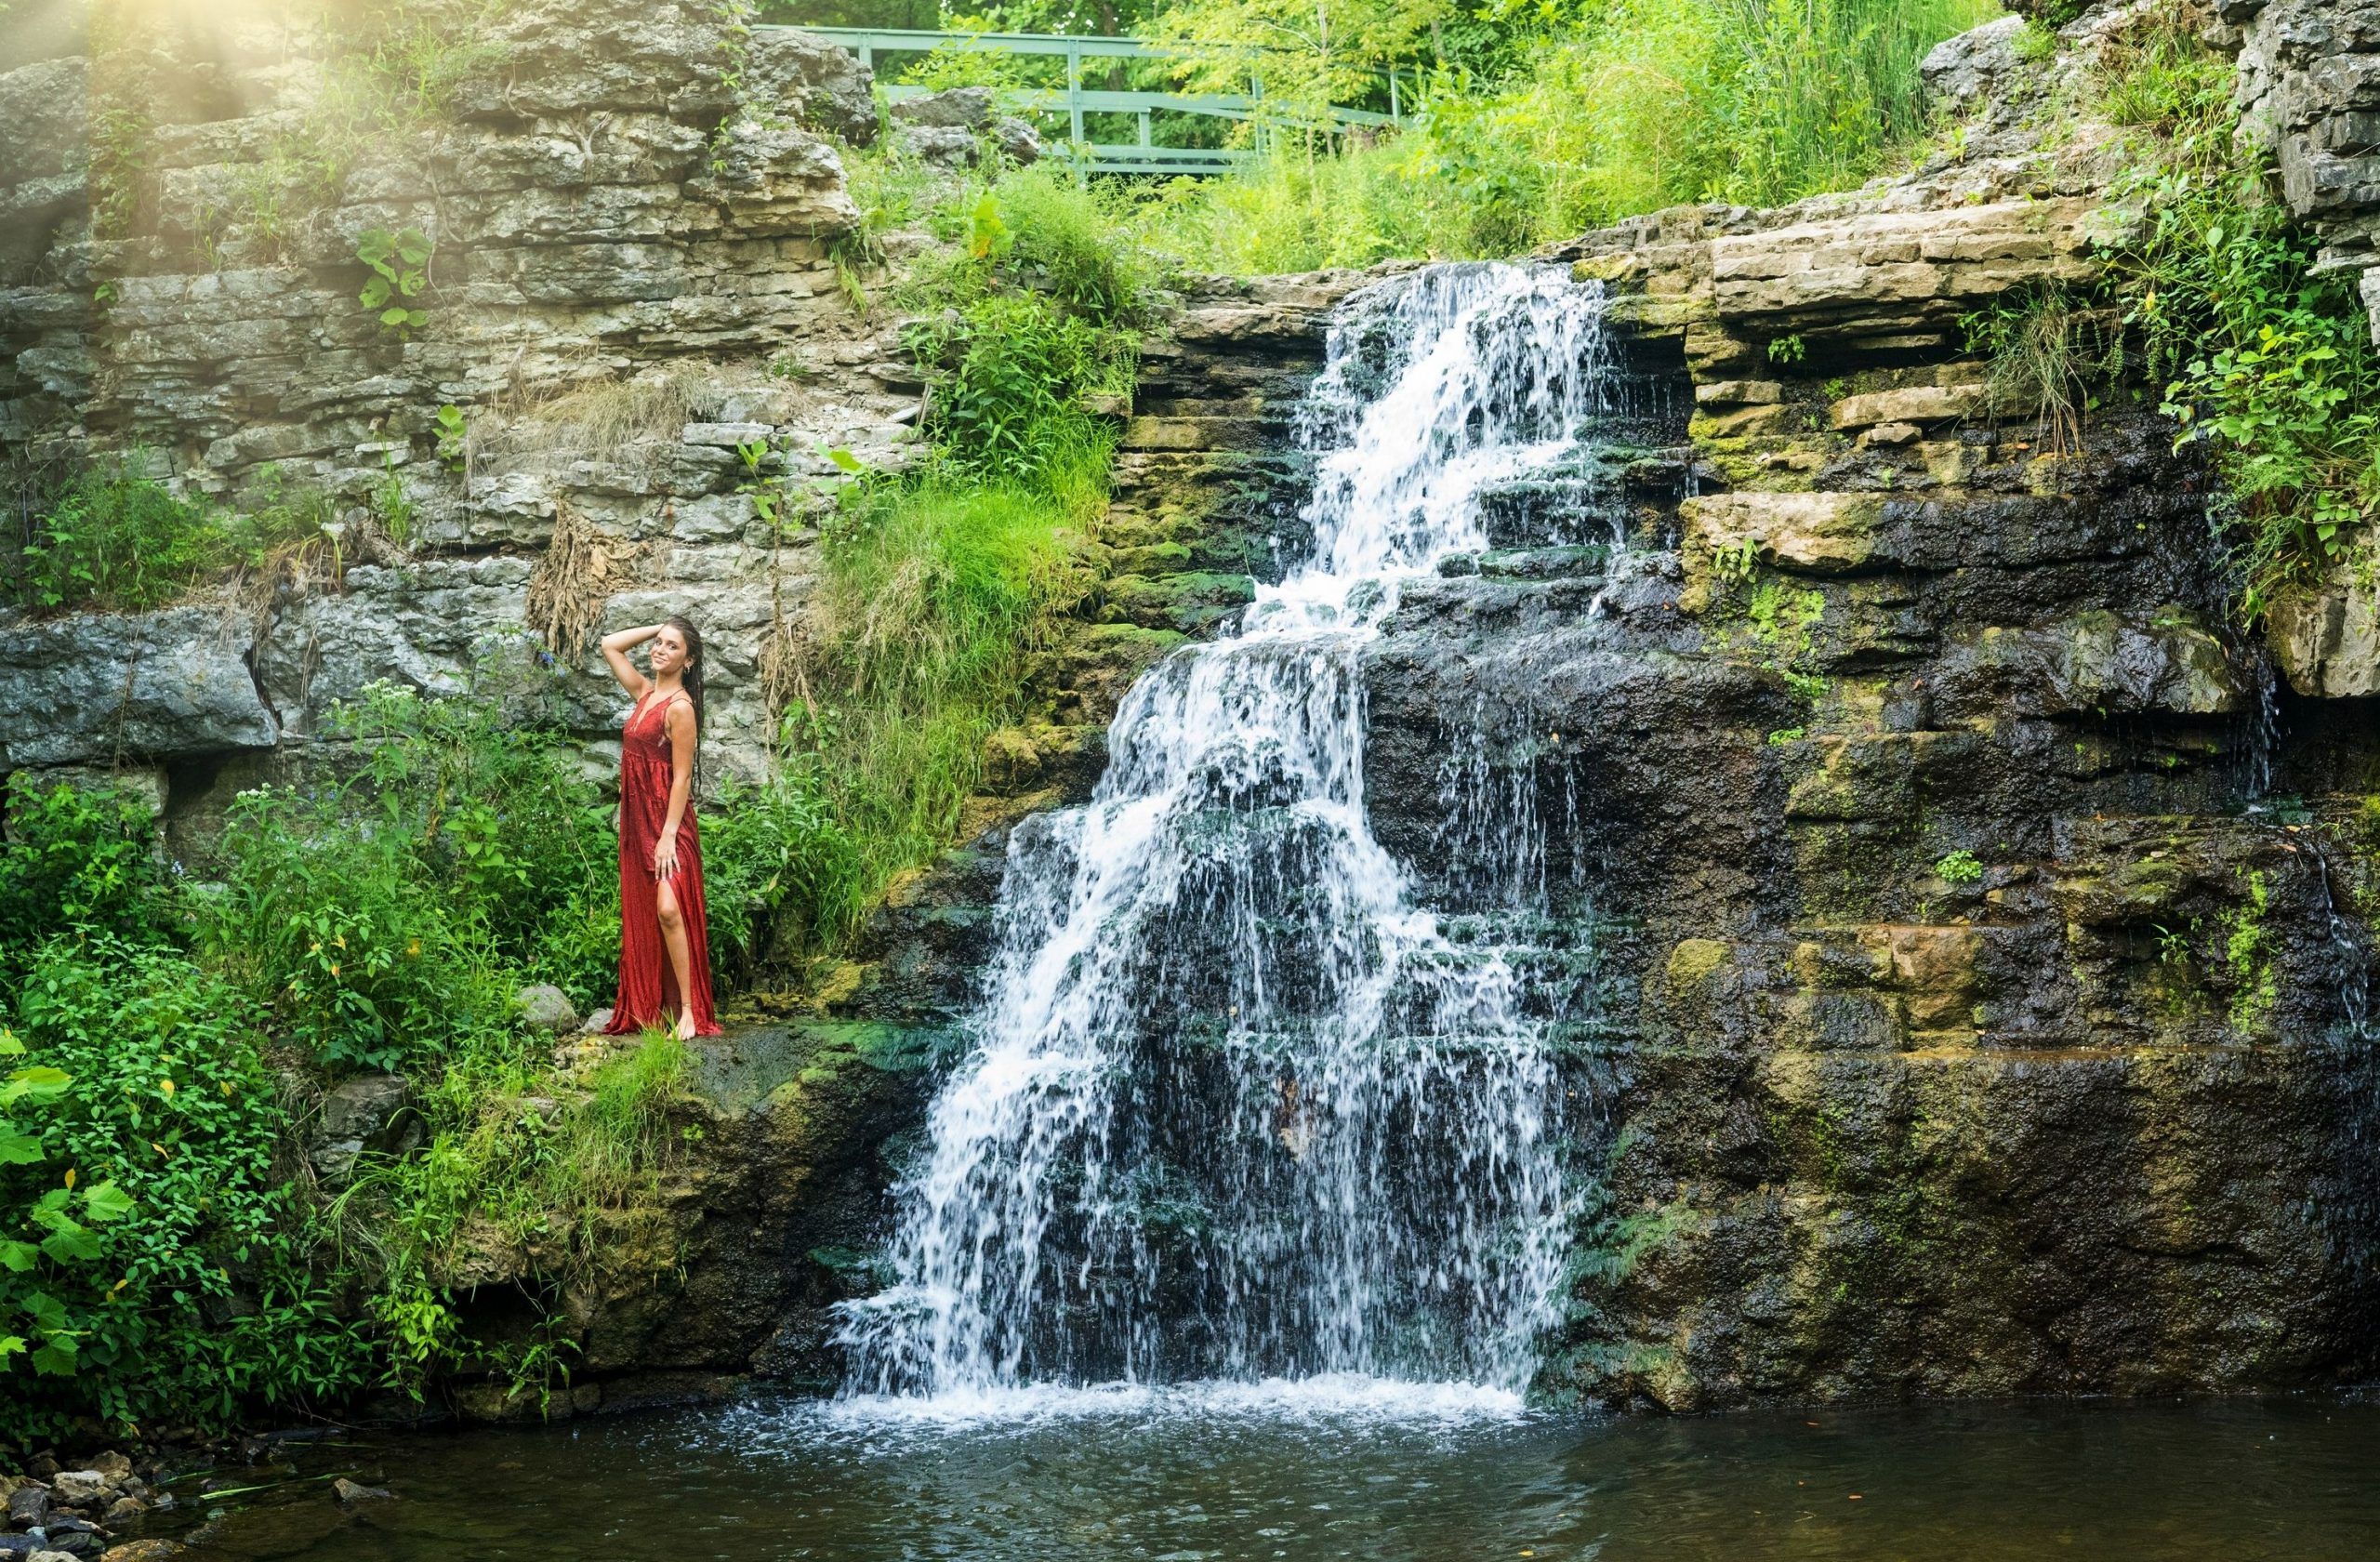 High School’s  Waterfall Senior Pictures